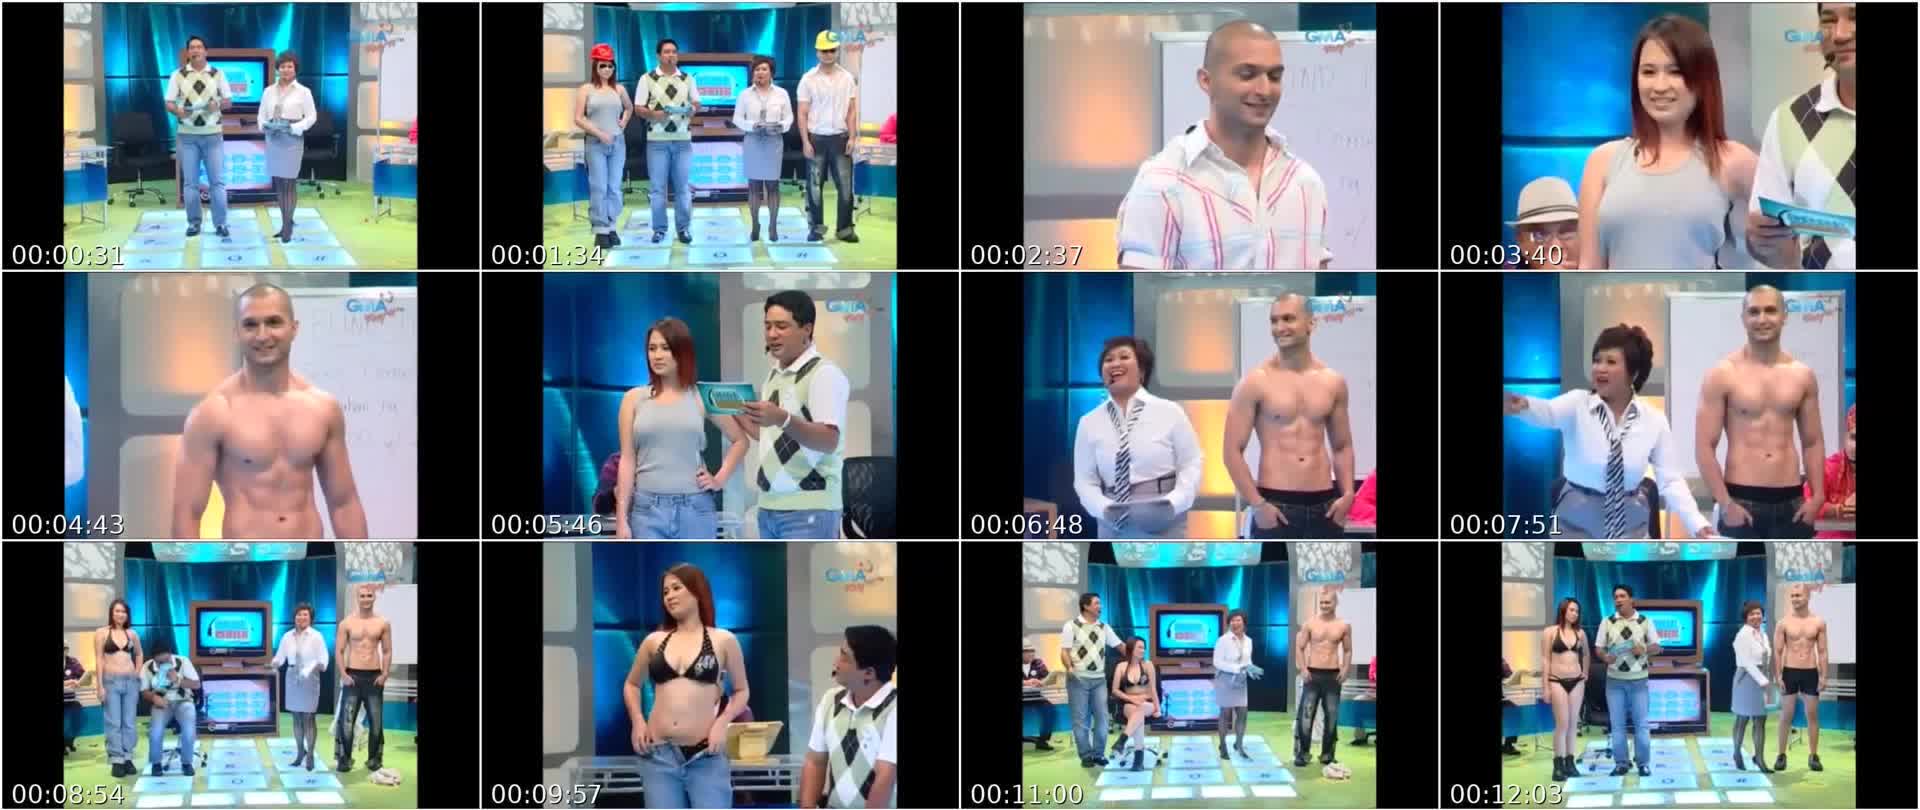 The Strip Show featuring Camille – Hubad na Katotohanan